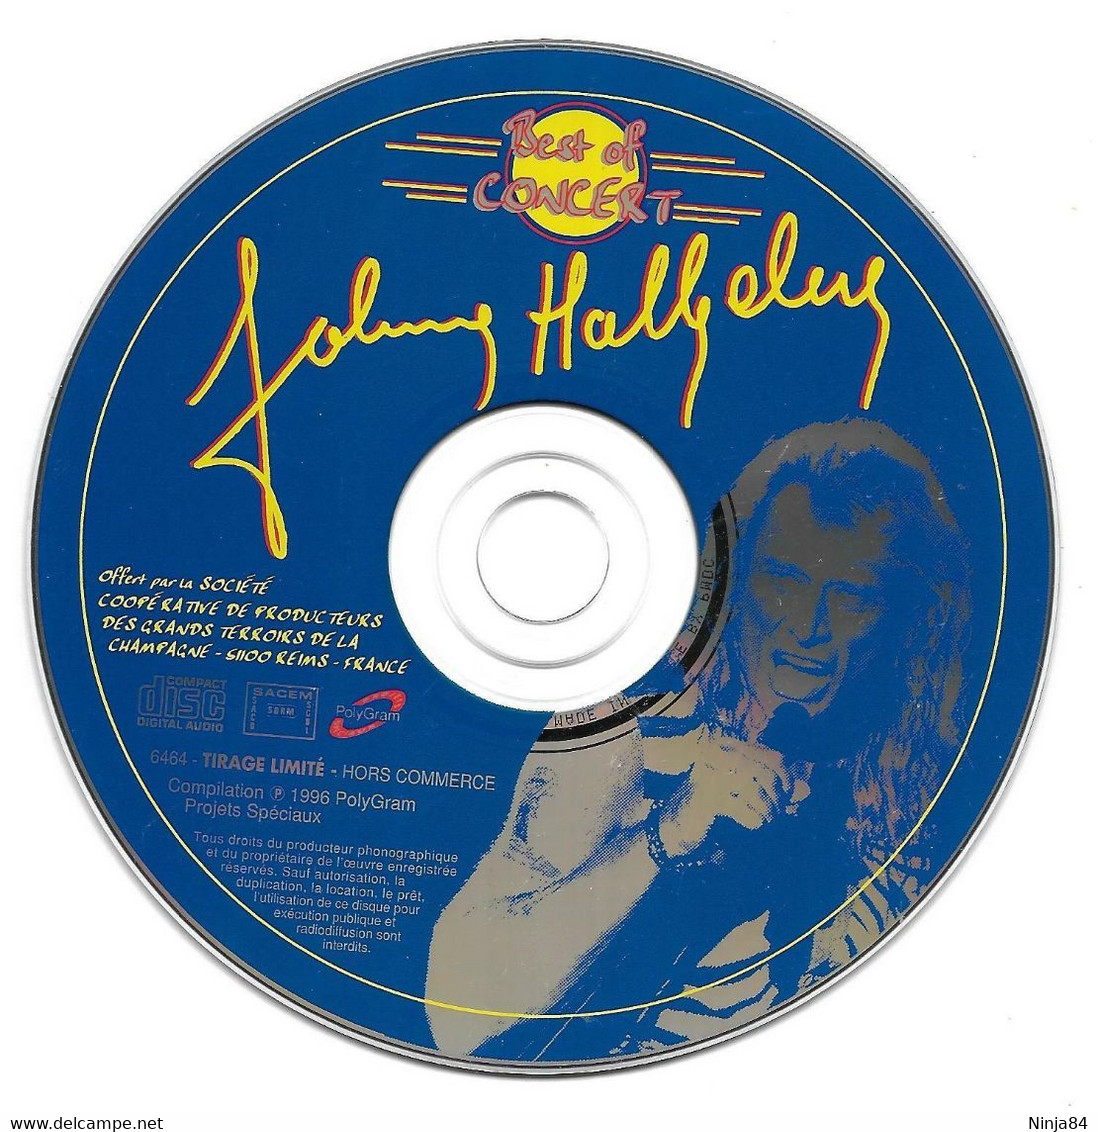 CD Johnny Hallyday / Cochran / Debout / Beatles / Mallory / Goldman "  Best Of Concert  "  Promo - Collector's Editions